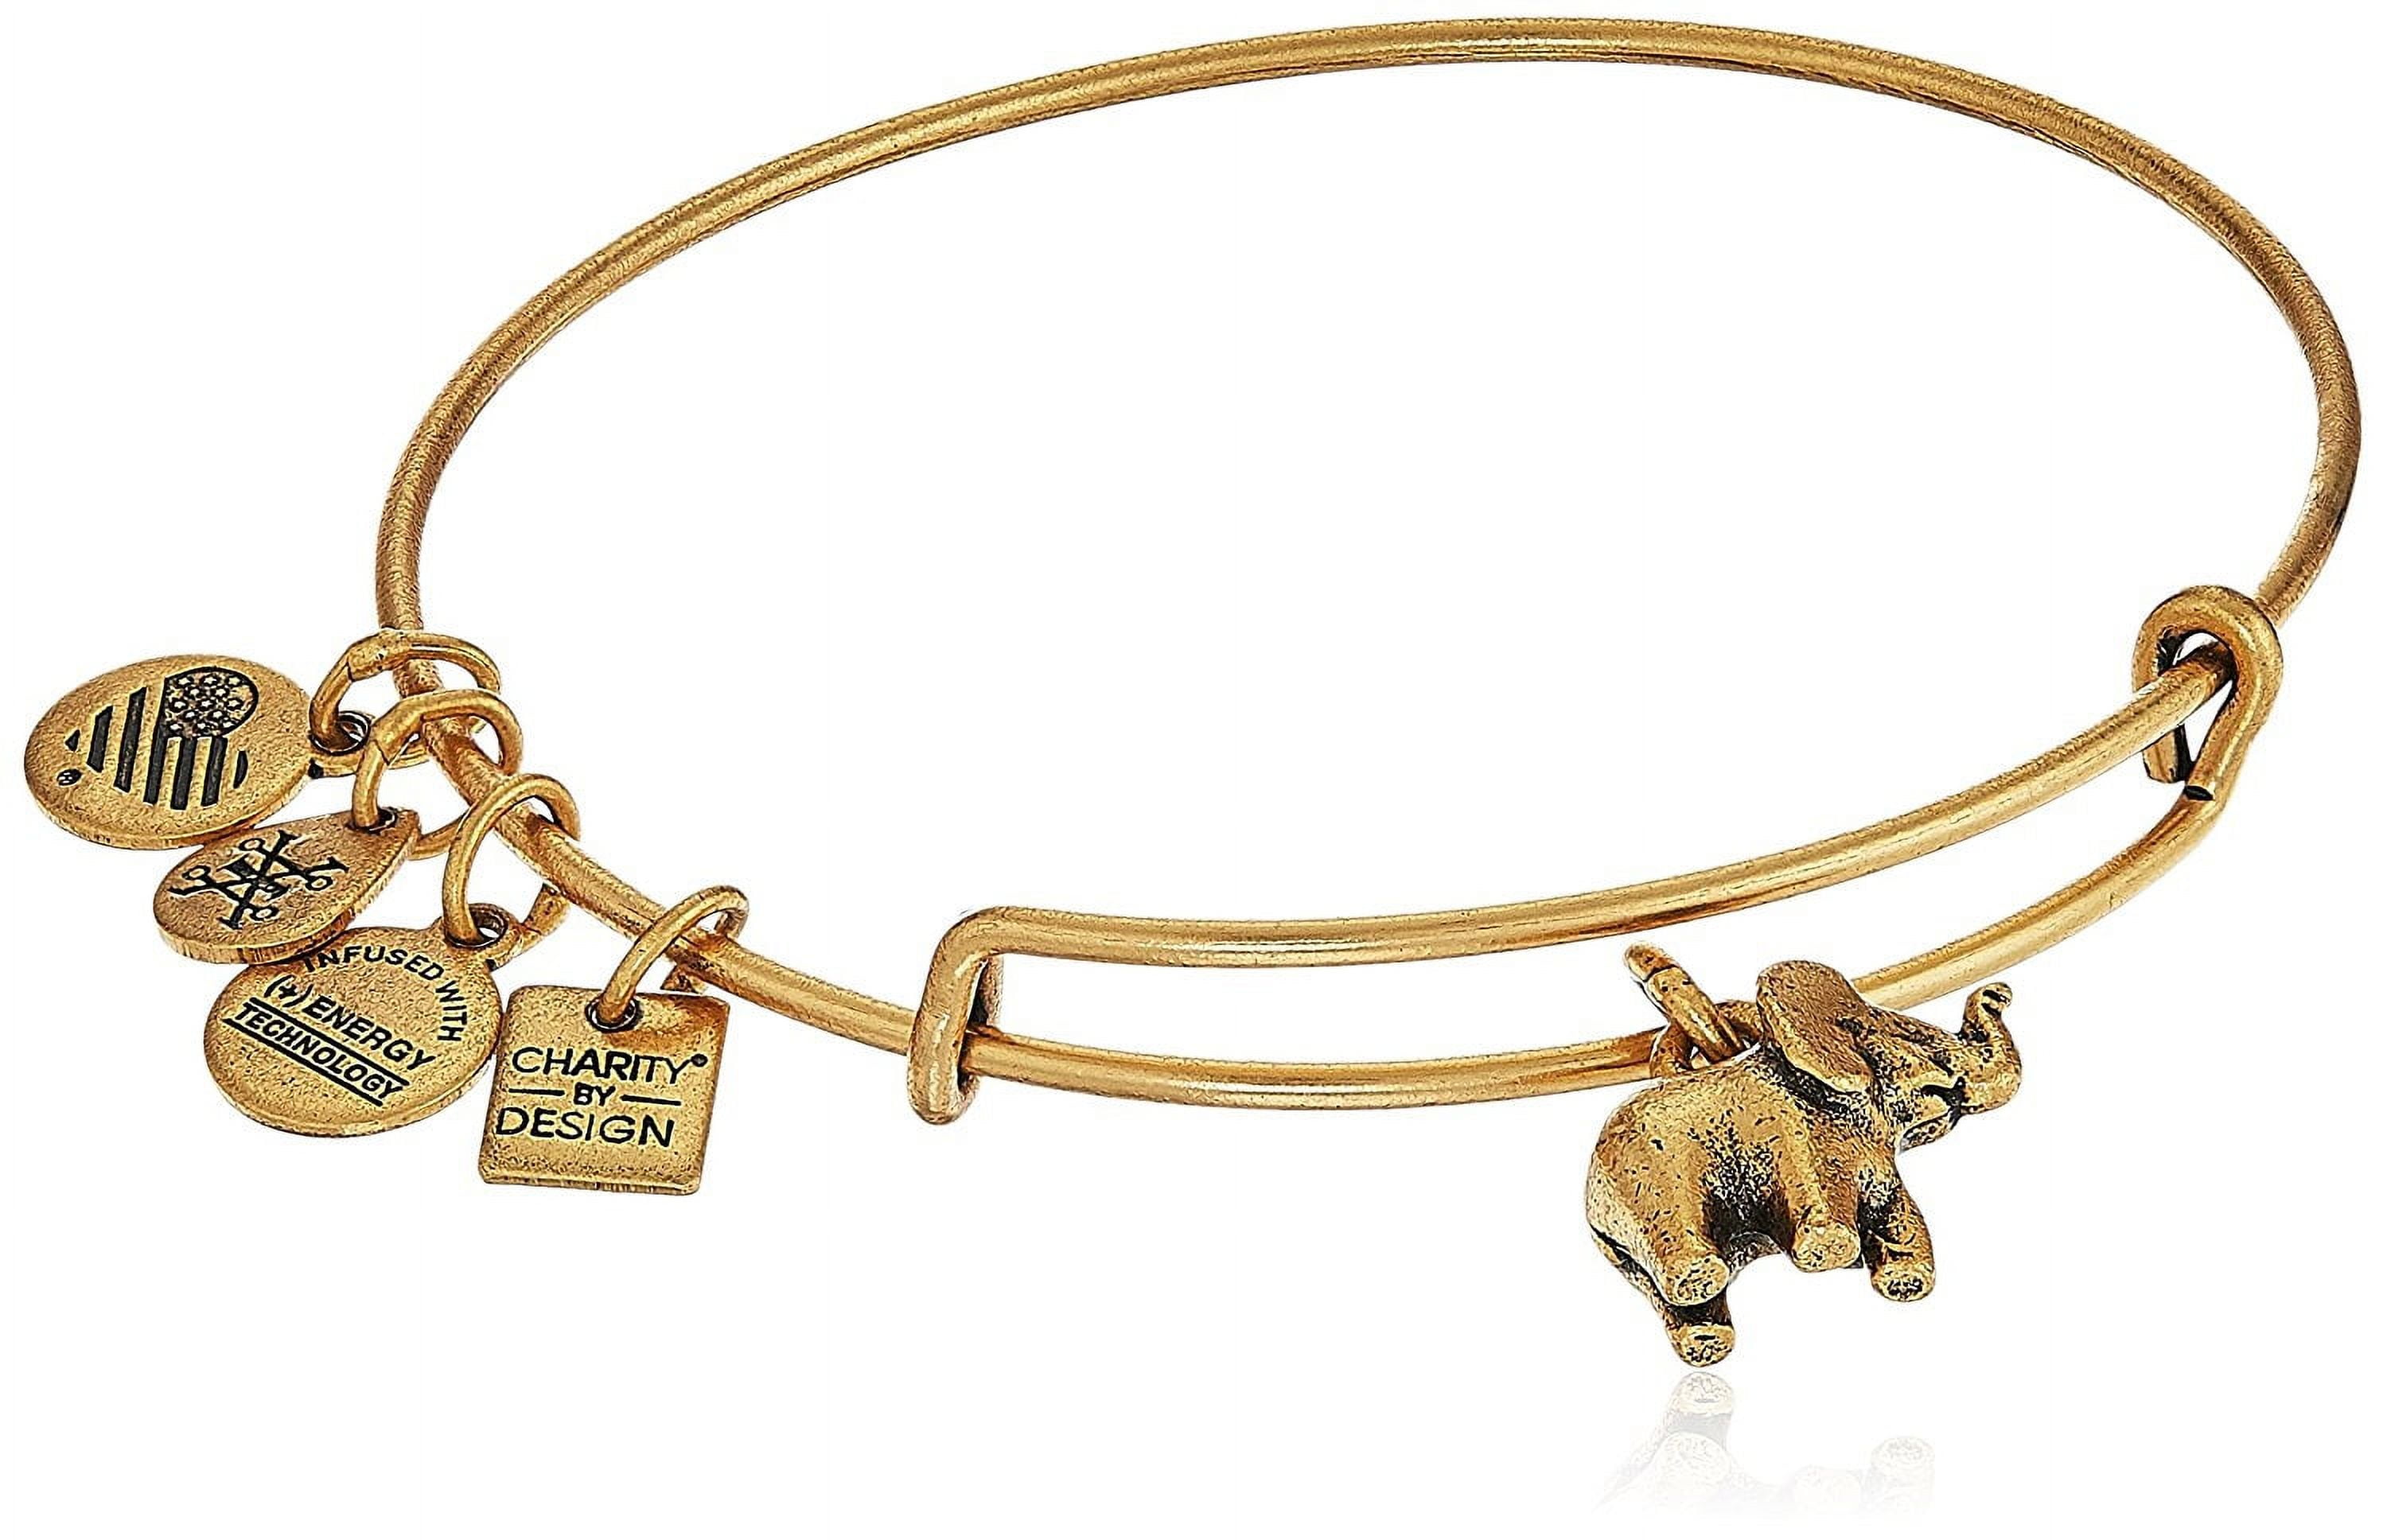 This Alex and Ani charm bracelet is on sale for just $18 on Amazon